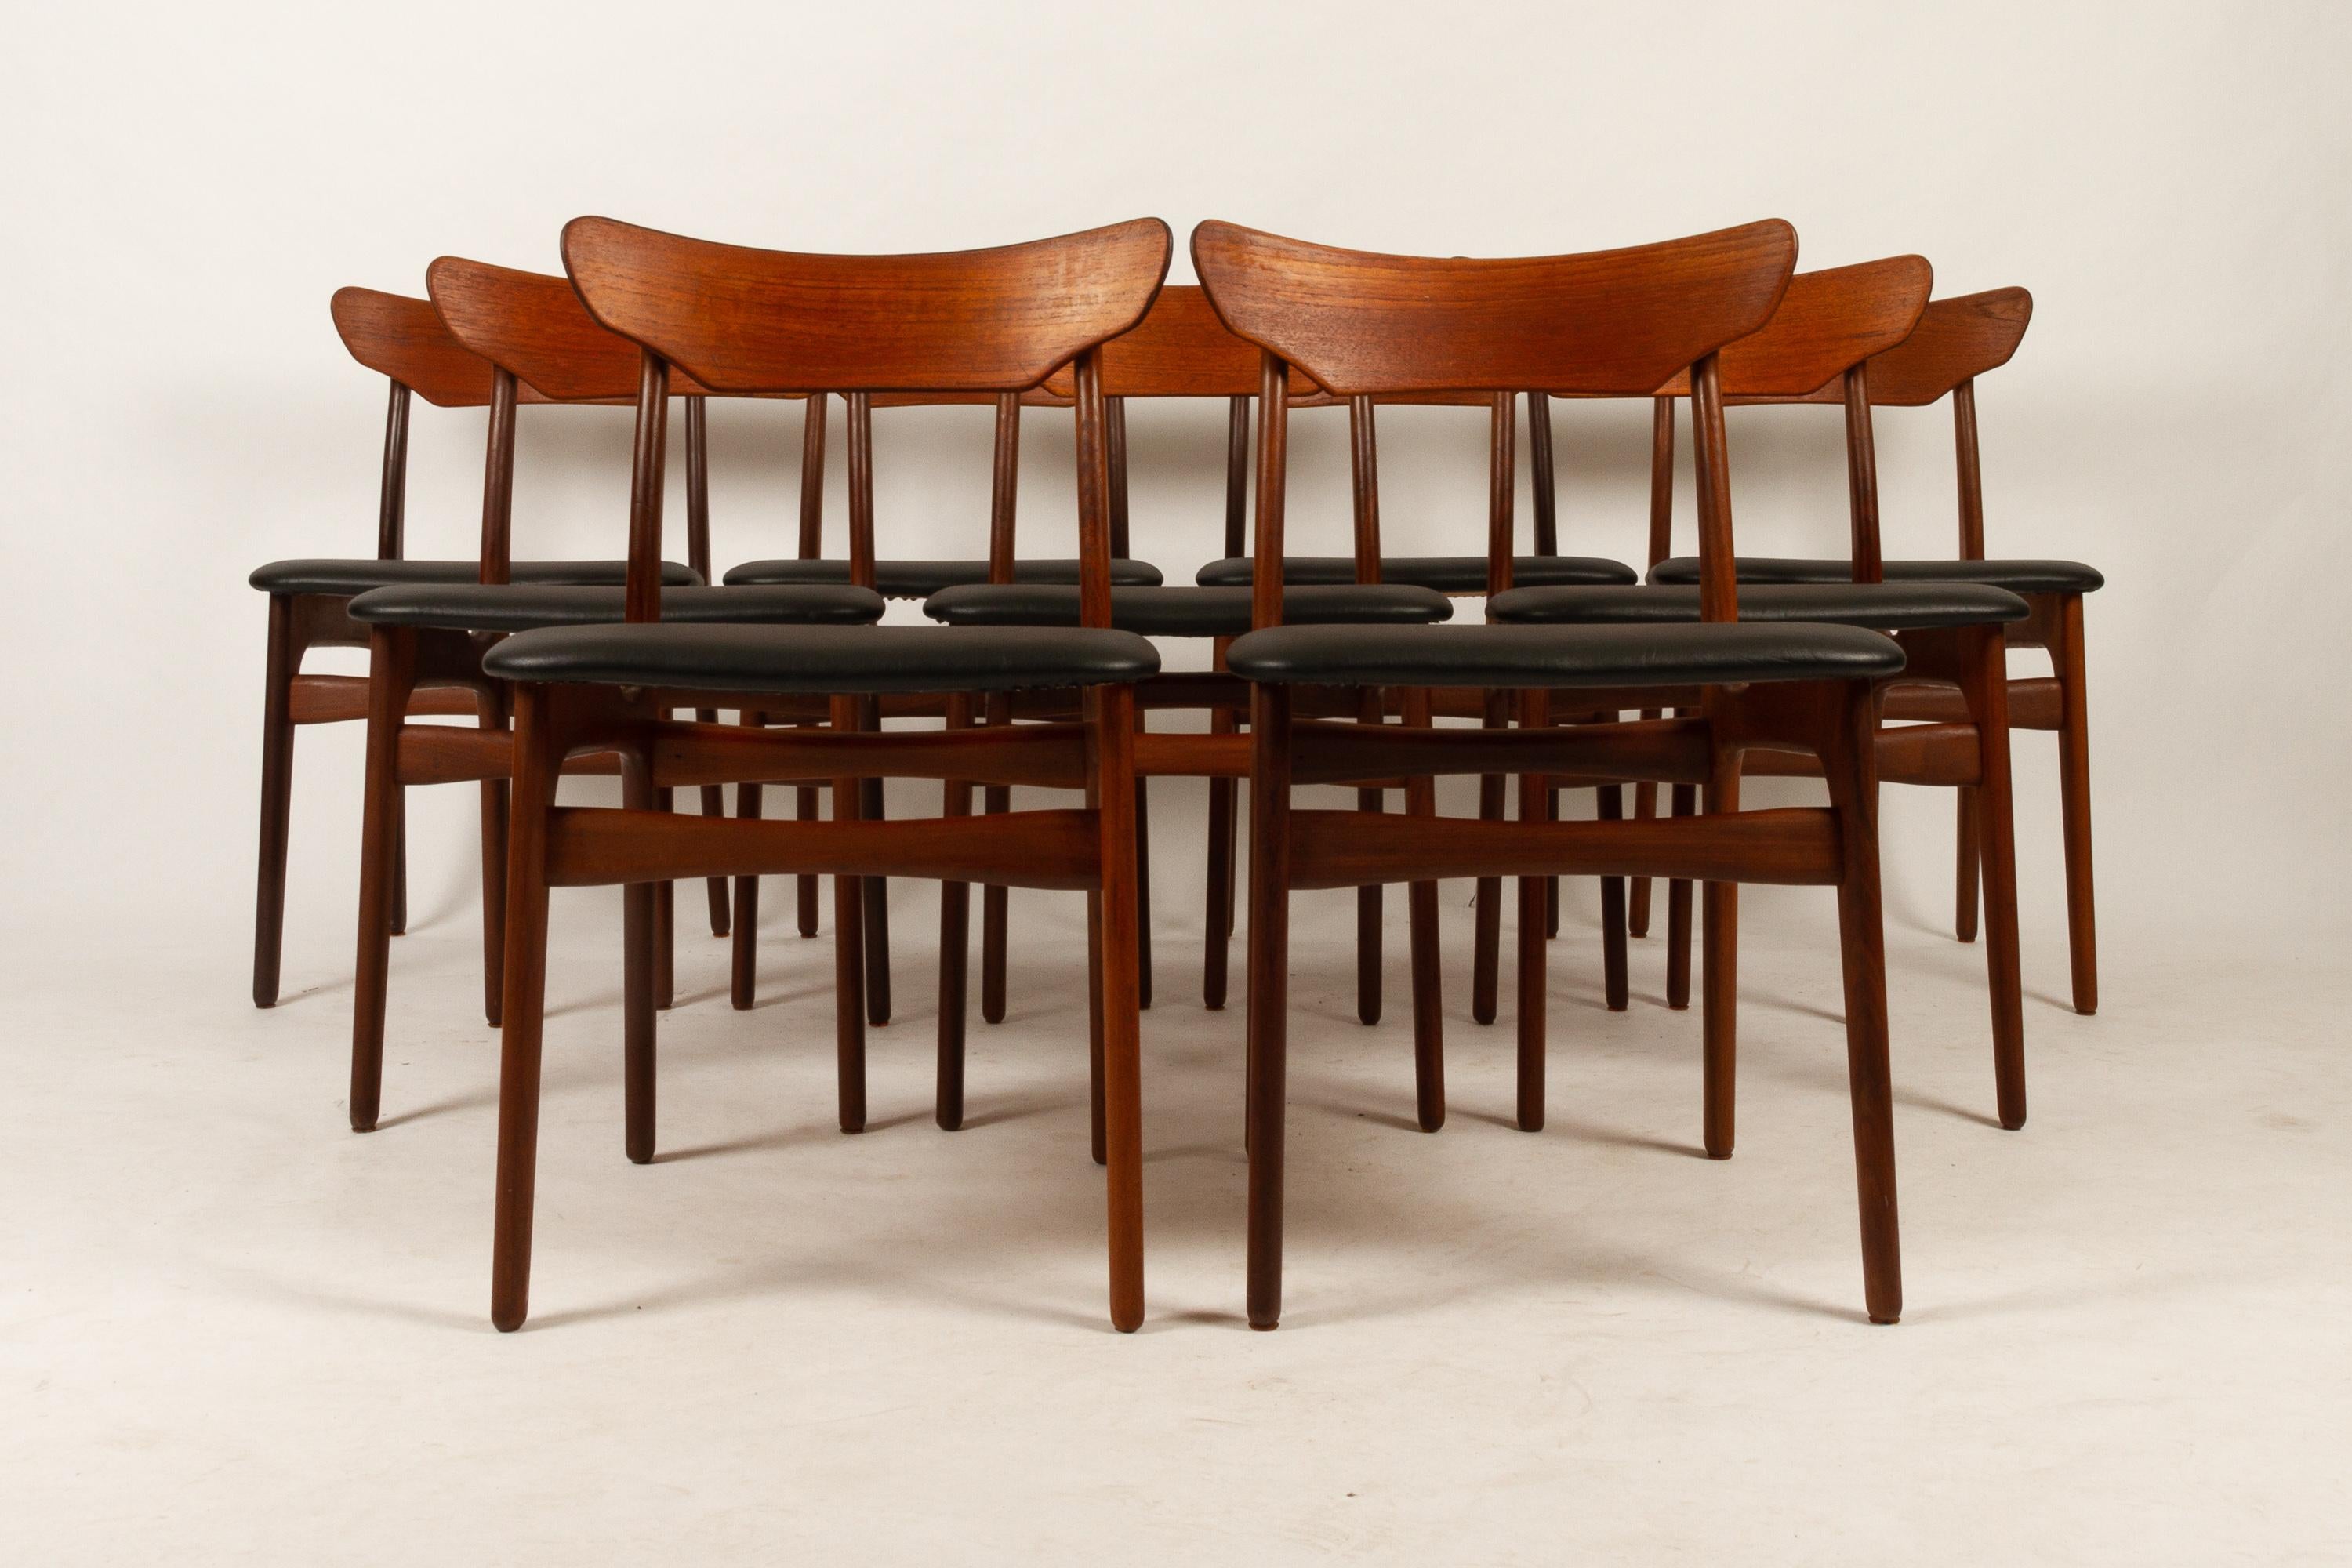 Beautiful set of nine Mid-Century Modern teak dining chairs. Sculpted backrests and a solid teak frame. Restored and reupholstered for maximum comfort, ready to enjoy. A Classic Danish modern chair.